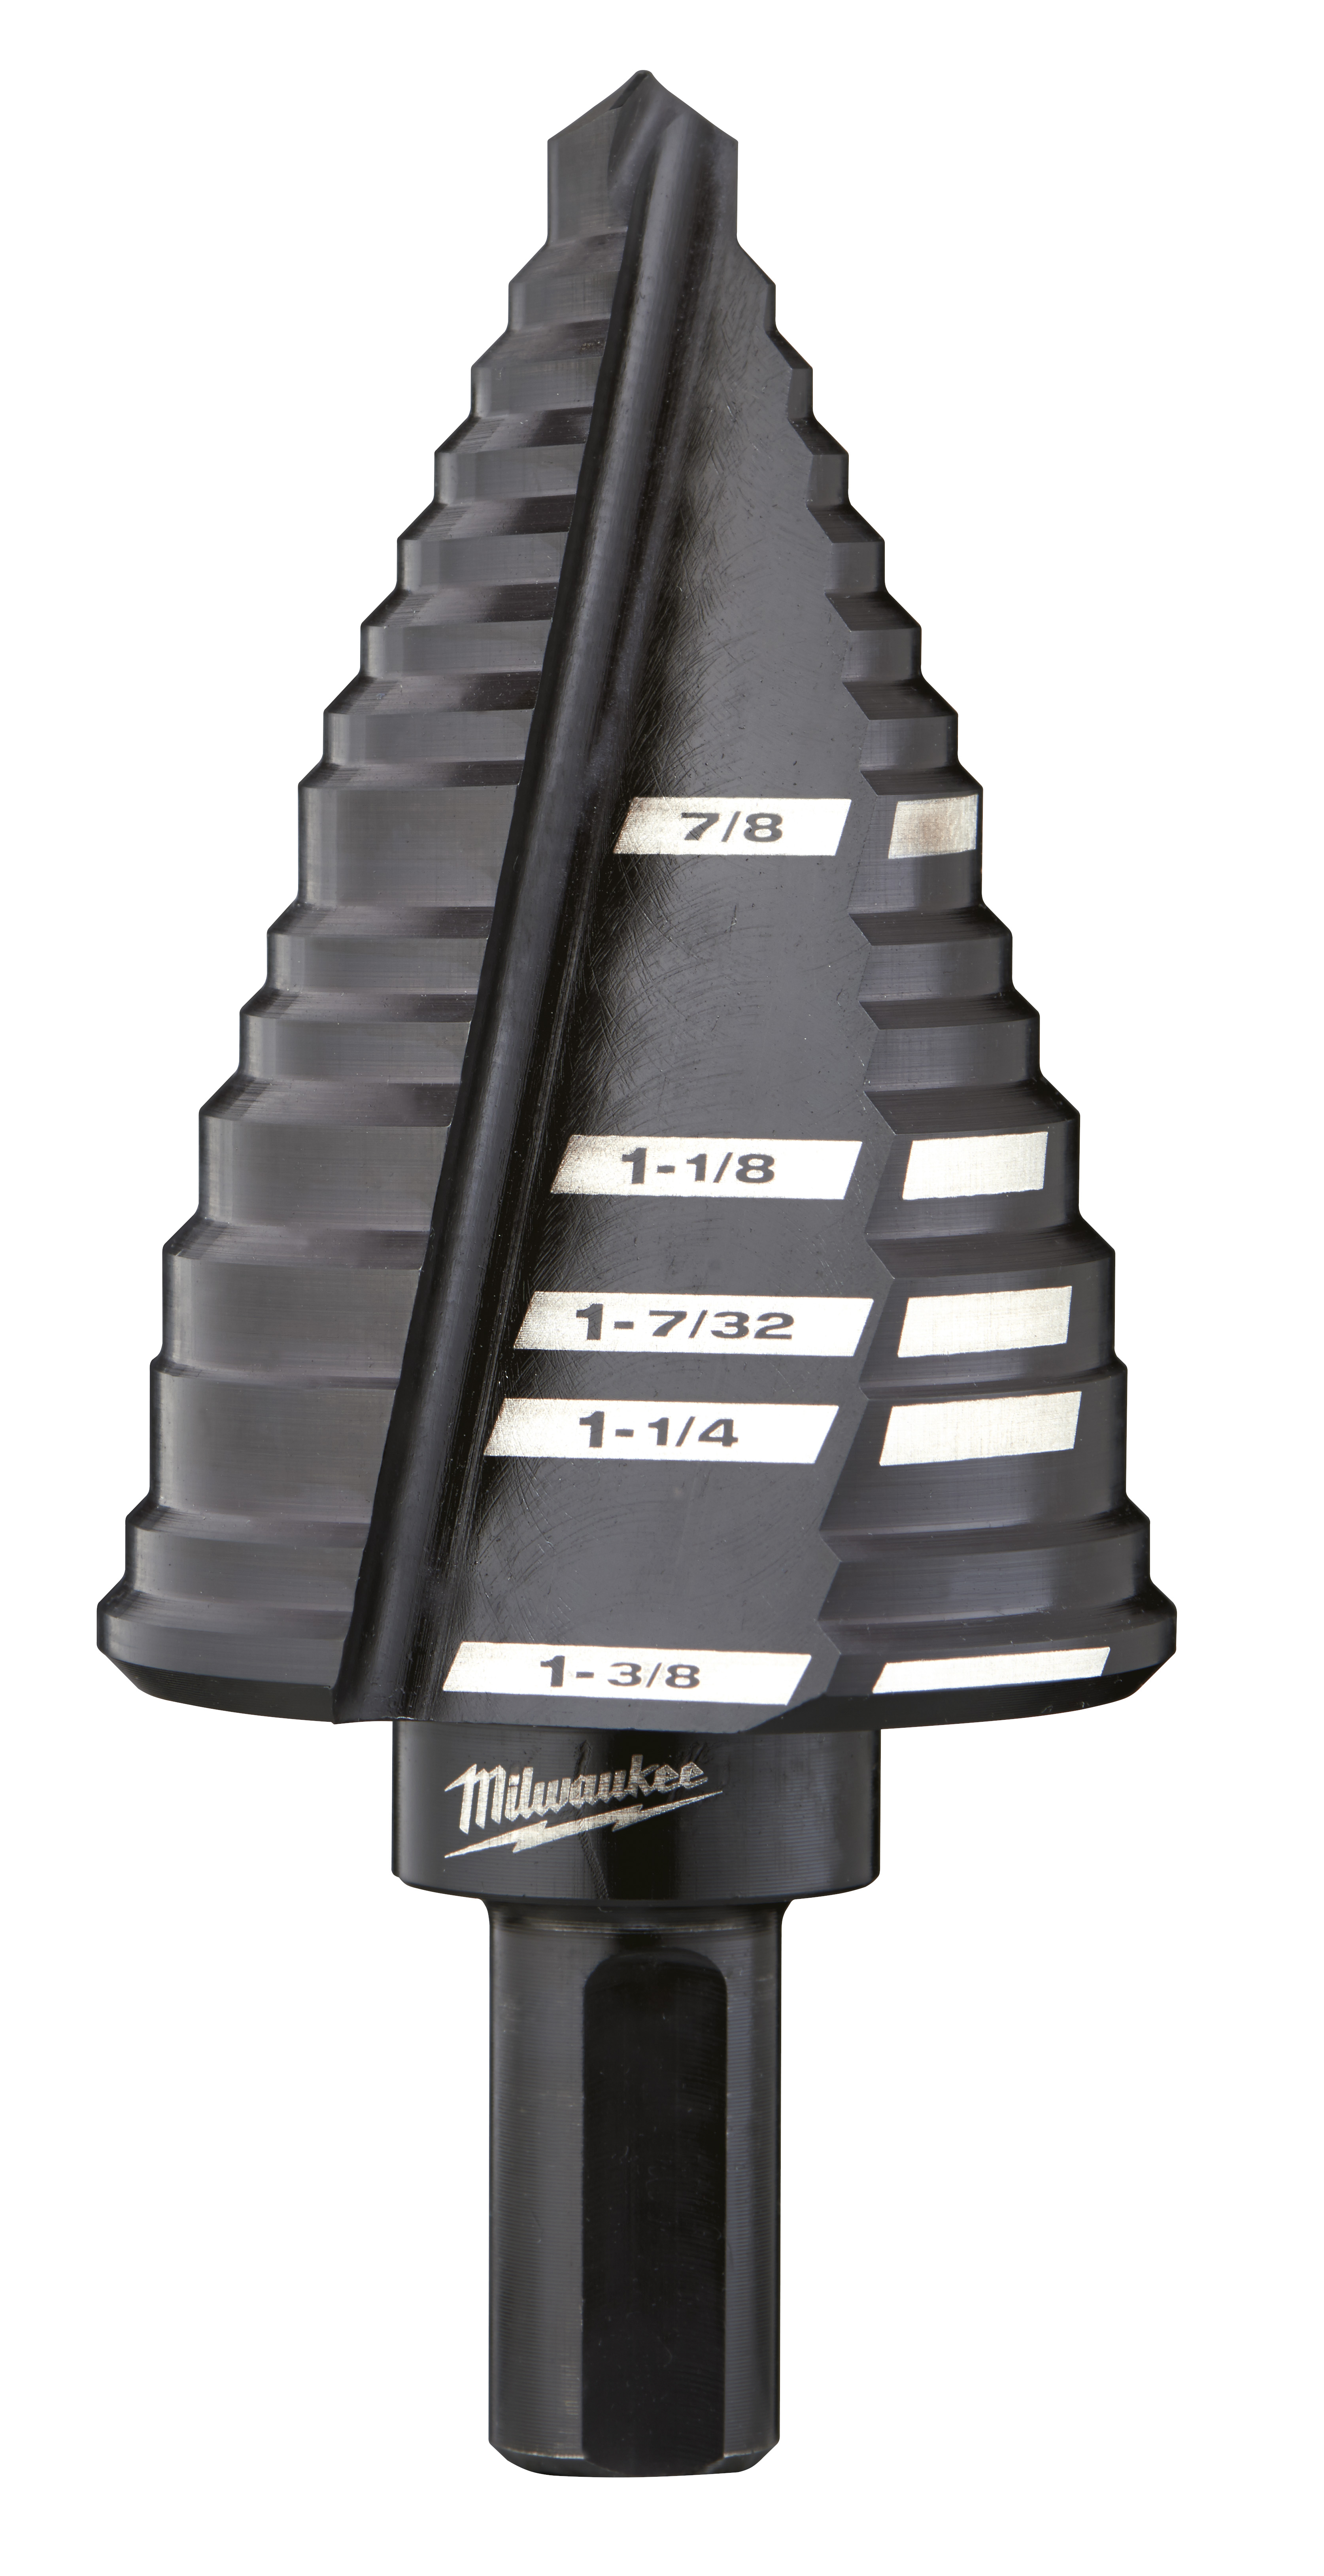 #12 Step Drill Bit, 7/8 in. to 1-3/8 in.